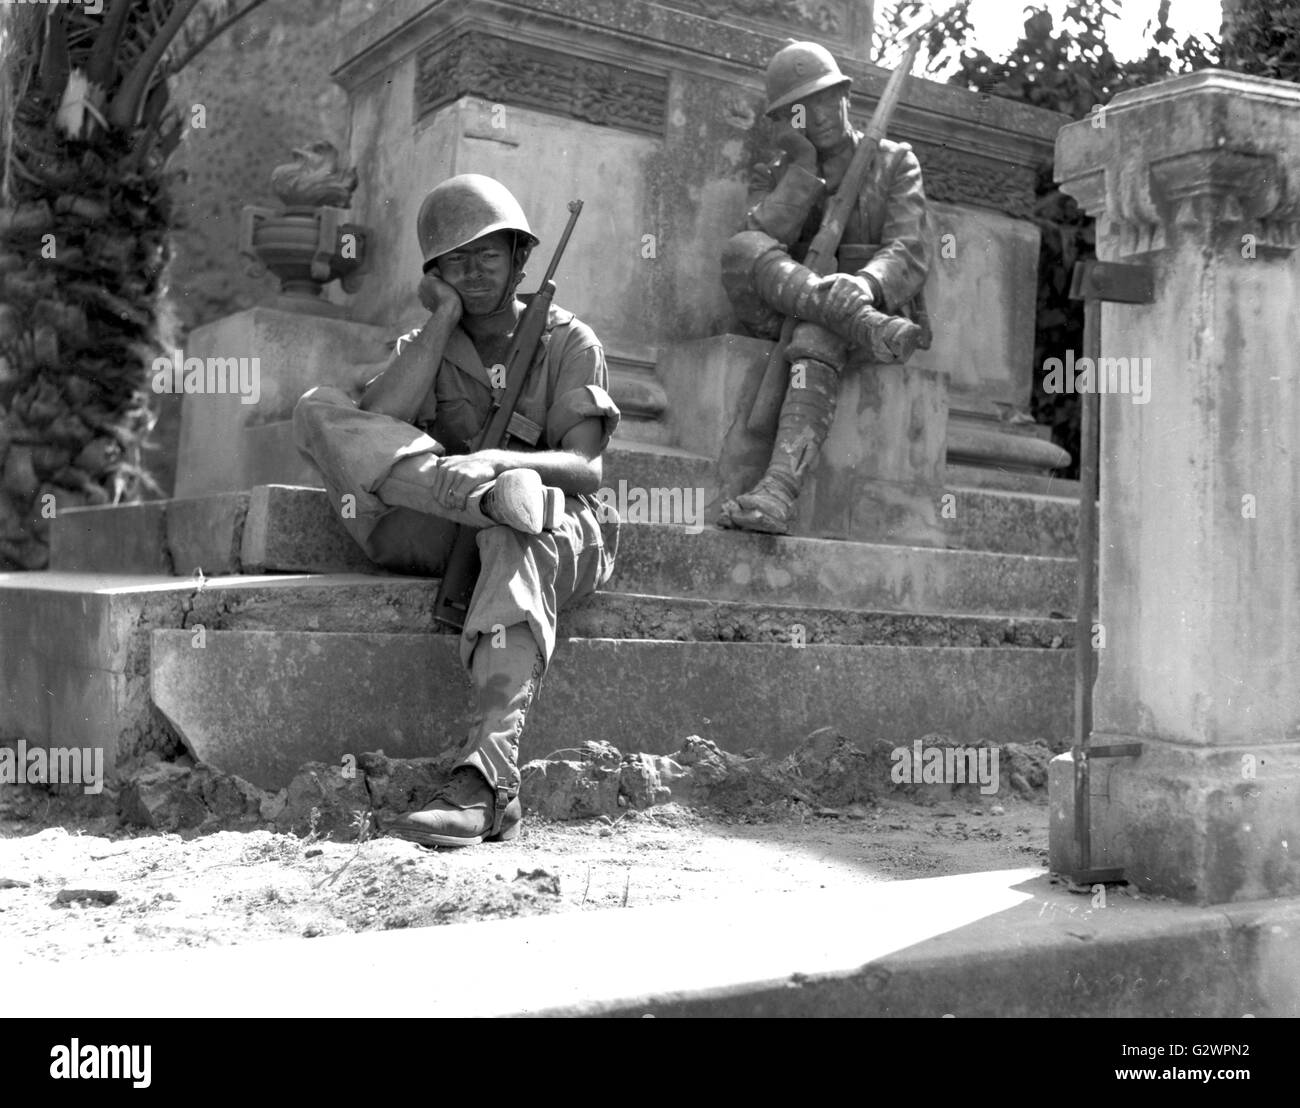 American Sgt. Dorman rests at the memorial to the Italian soldiers of WWI in Sicily. Stock Photo